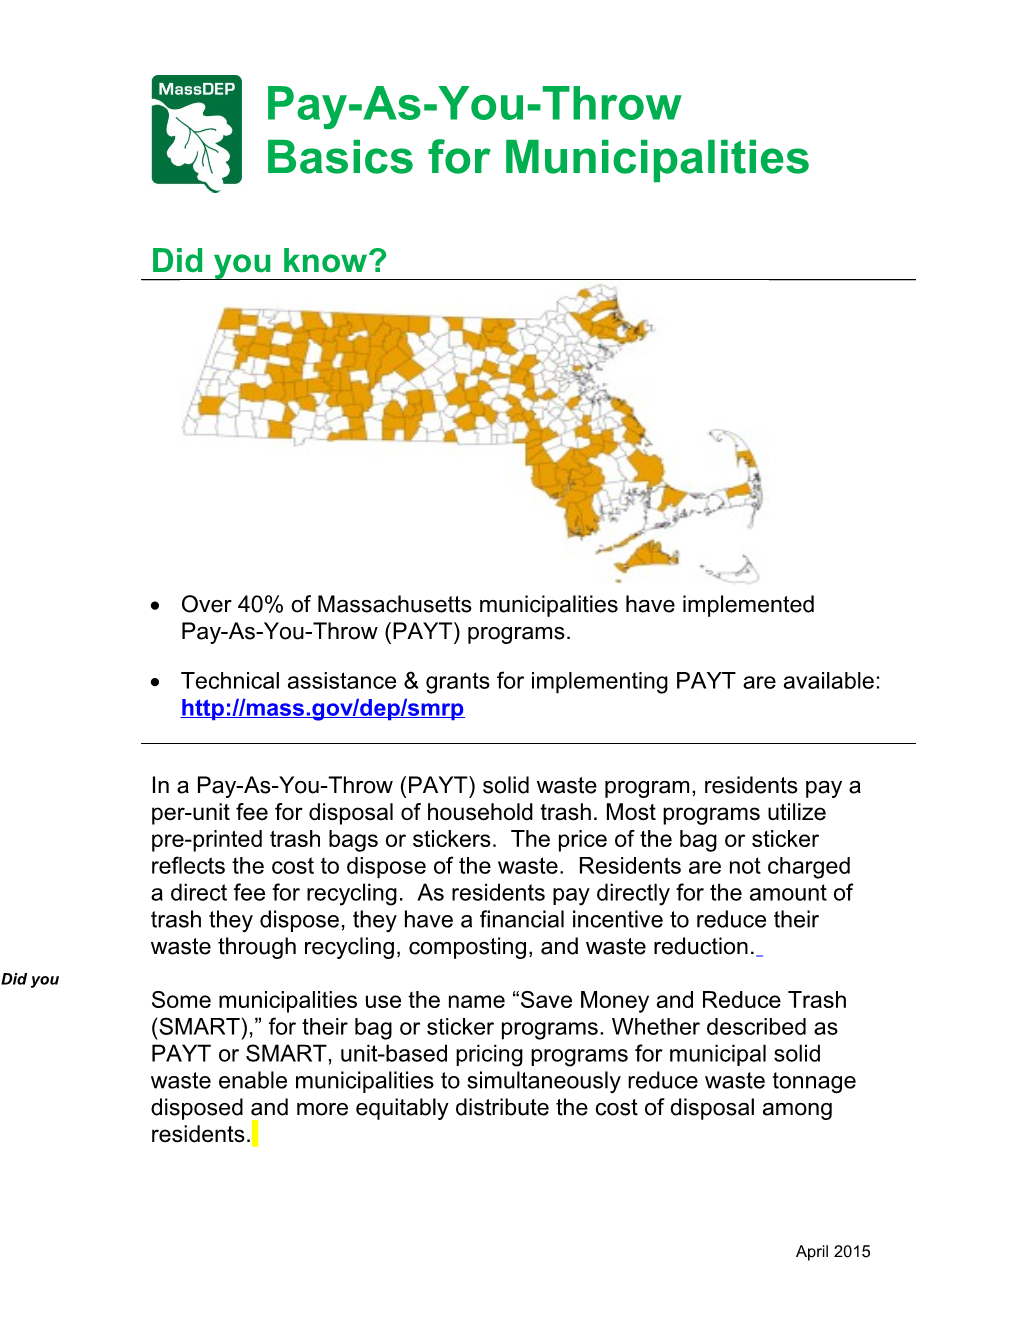 PAYT Provides Residents an Opportunity to Save Money on Their Trash Bills and Promotes